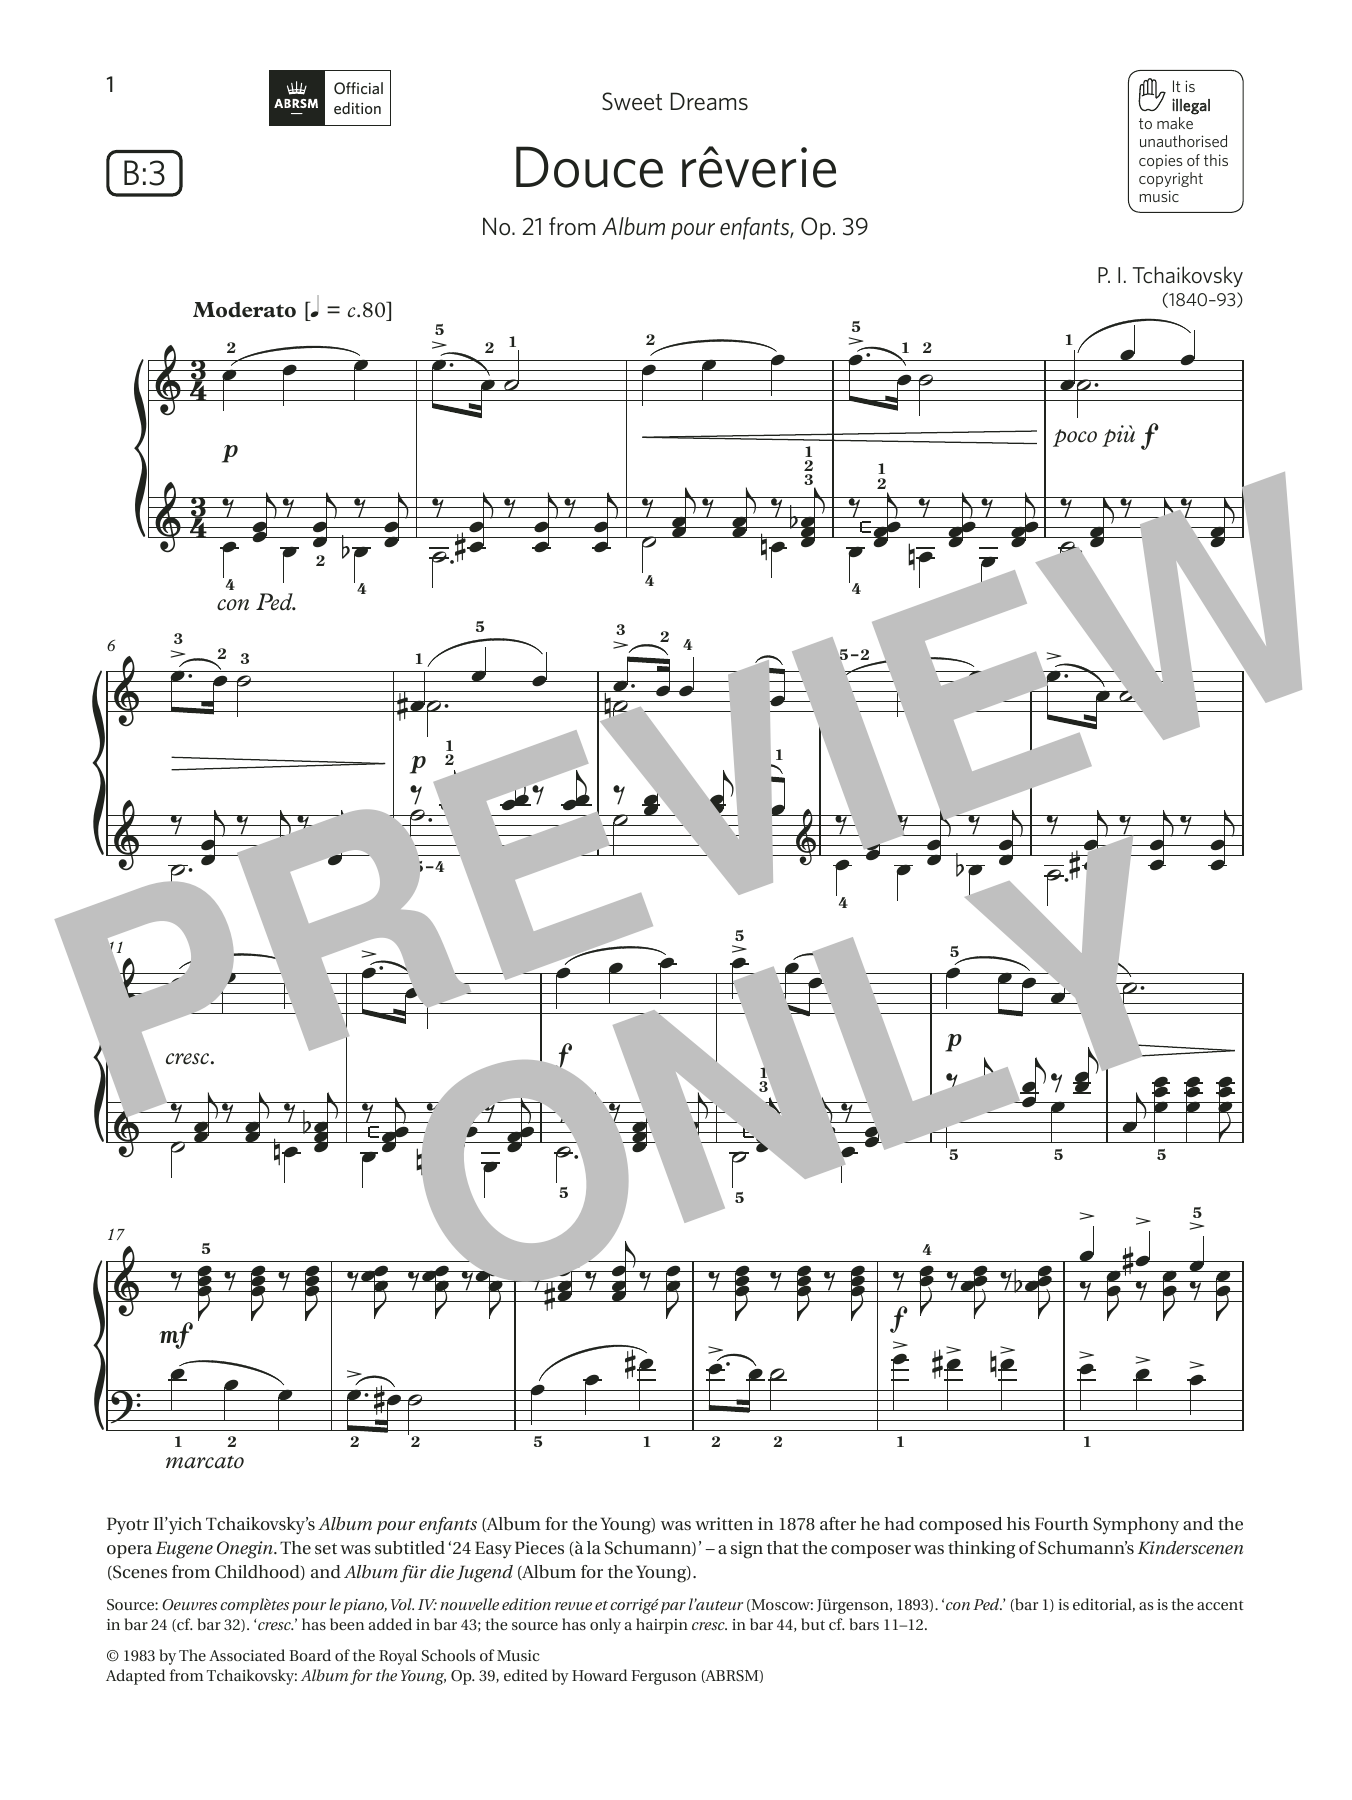 Download Pyotr Il'yich Tchaikovsky Douce rêverie (Grade 5, list B3, from Sheet Music